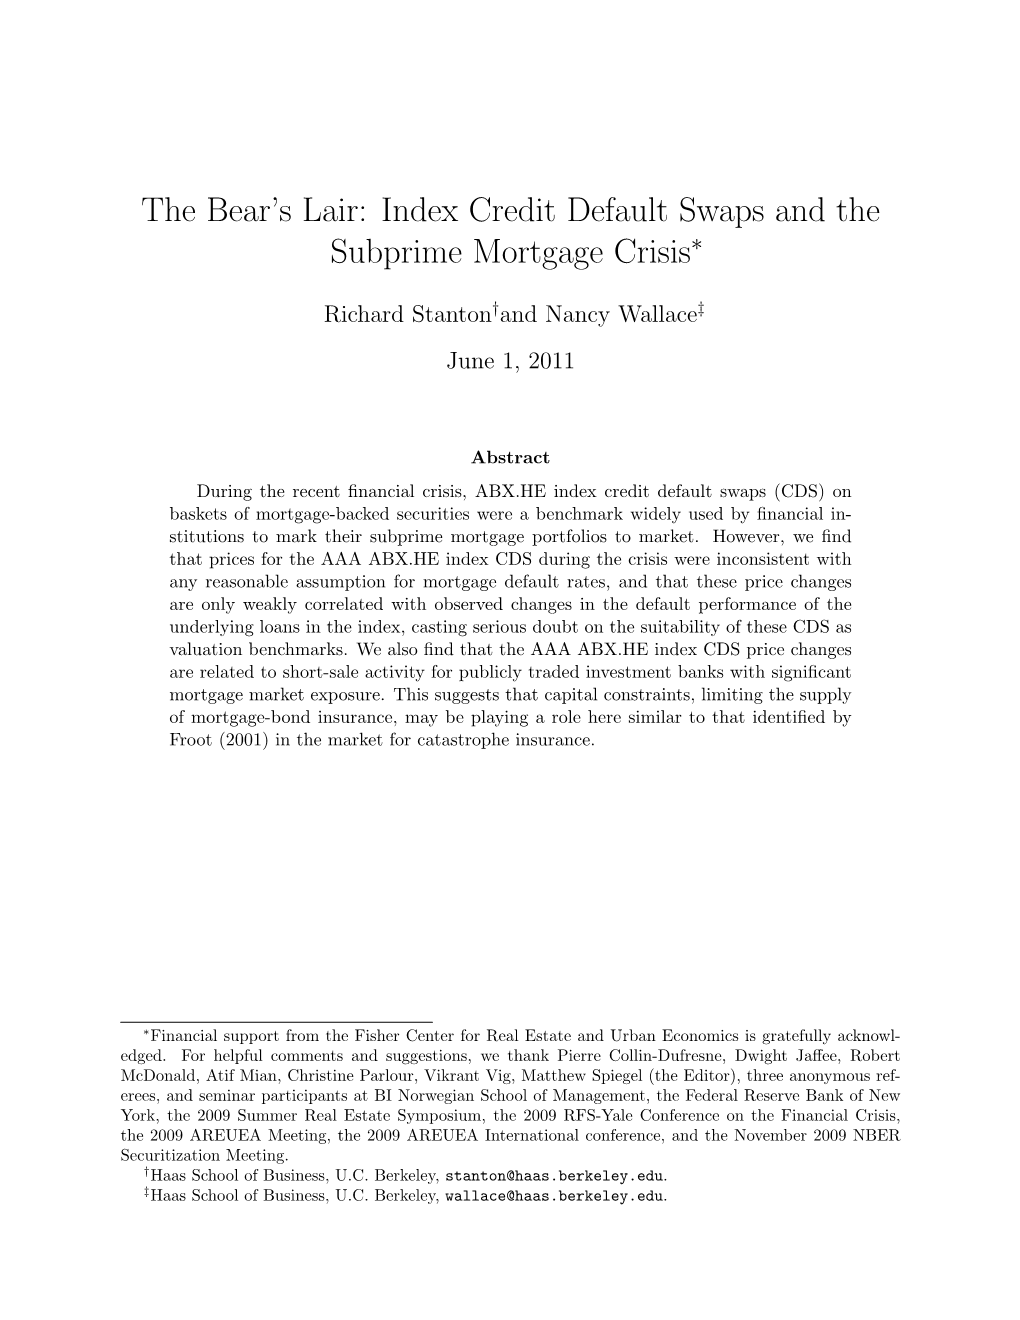 Index Credit Default Swaps and the Subprime Mortgage Crisis∗